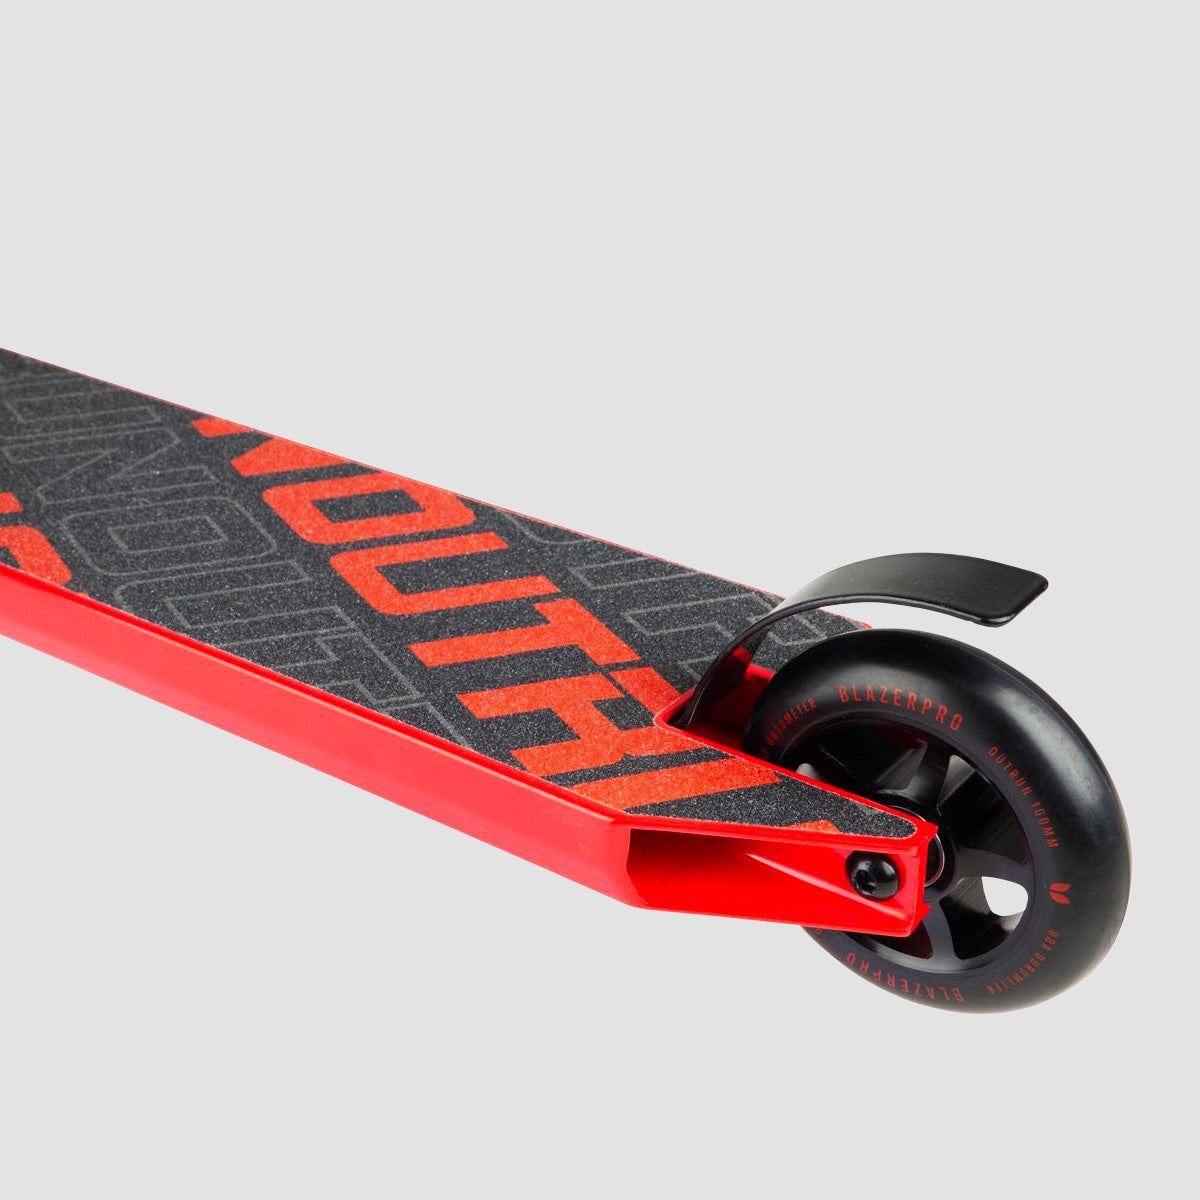 Blazer Pro Outrun 2 500mm Complete Scooter Red